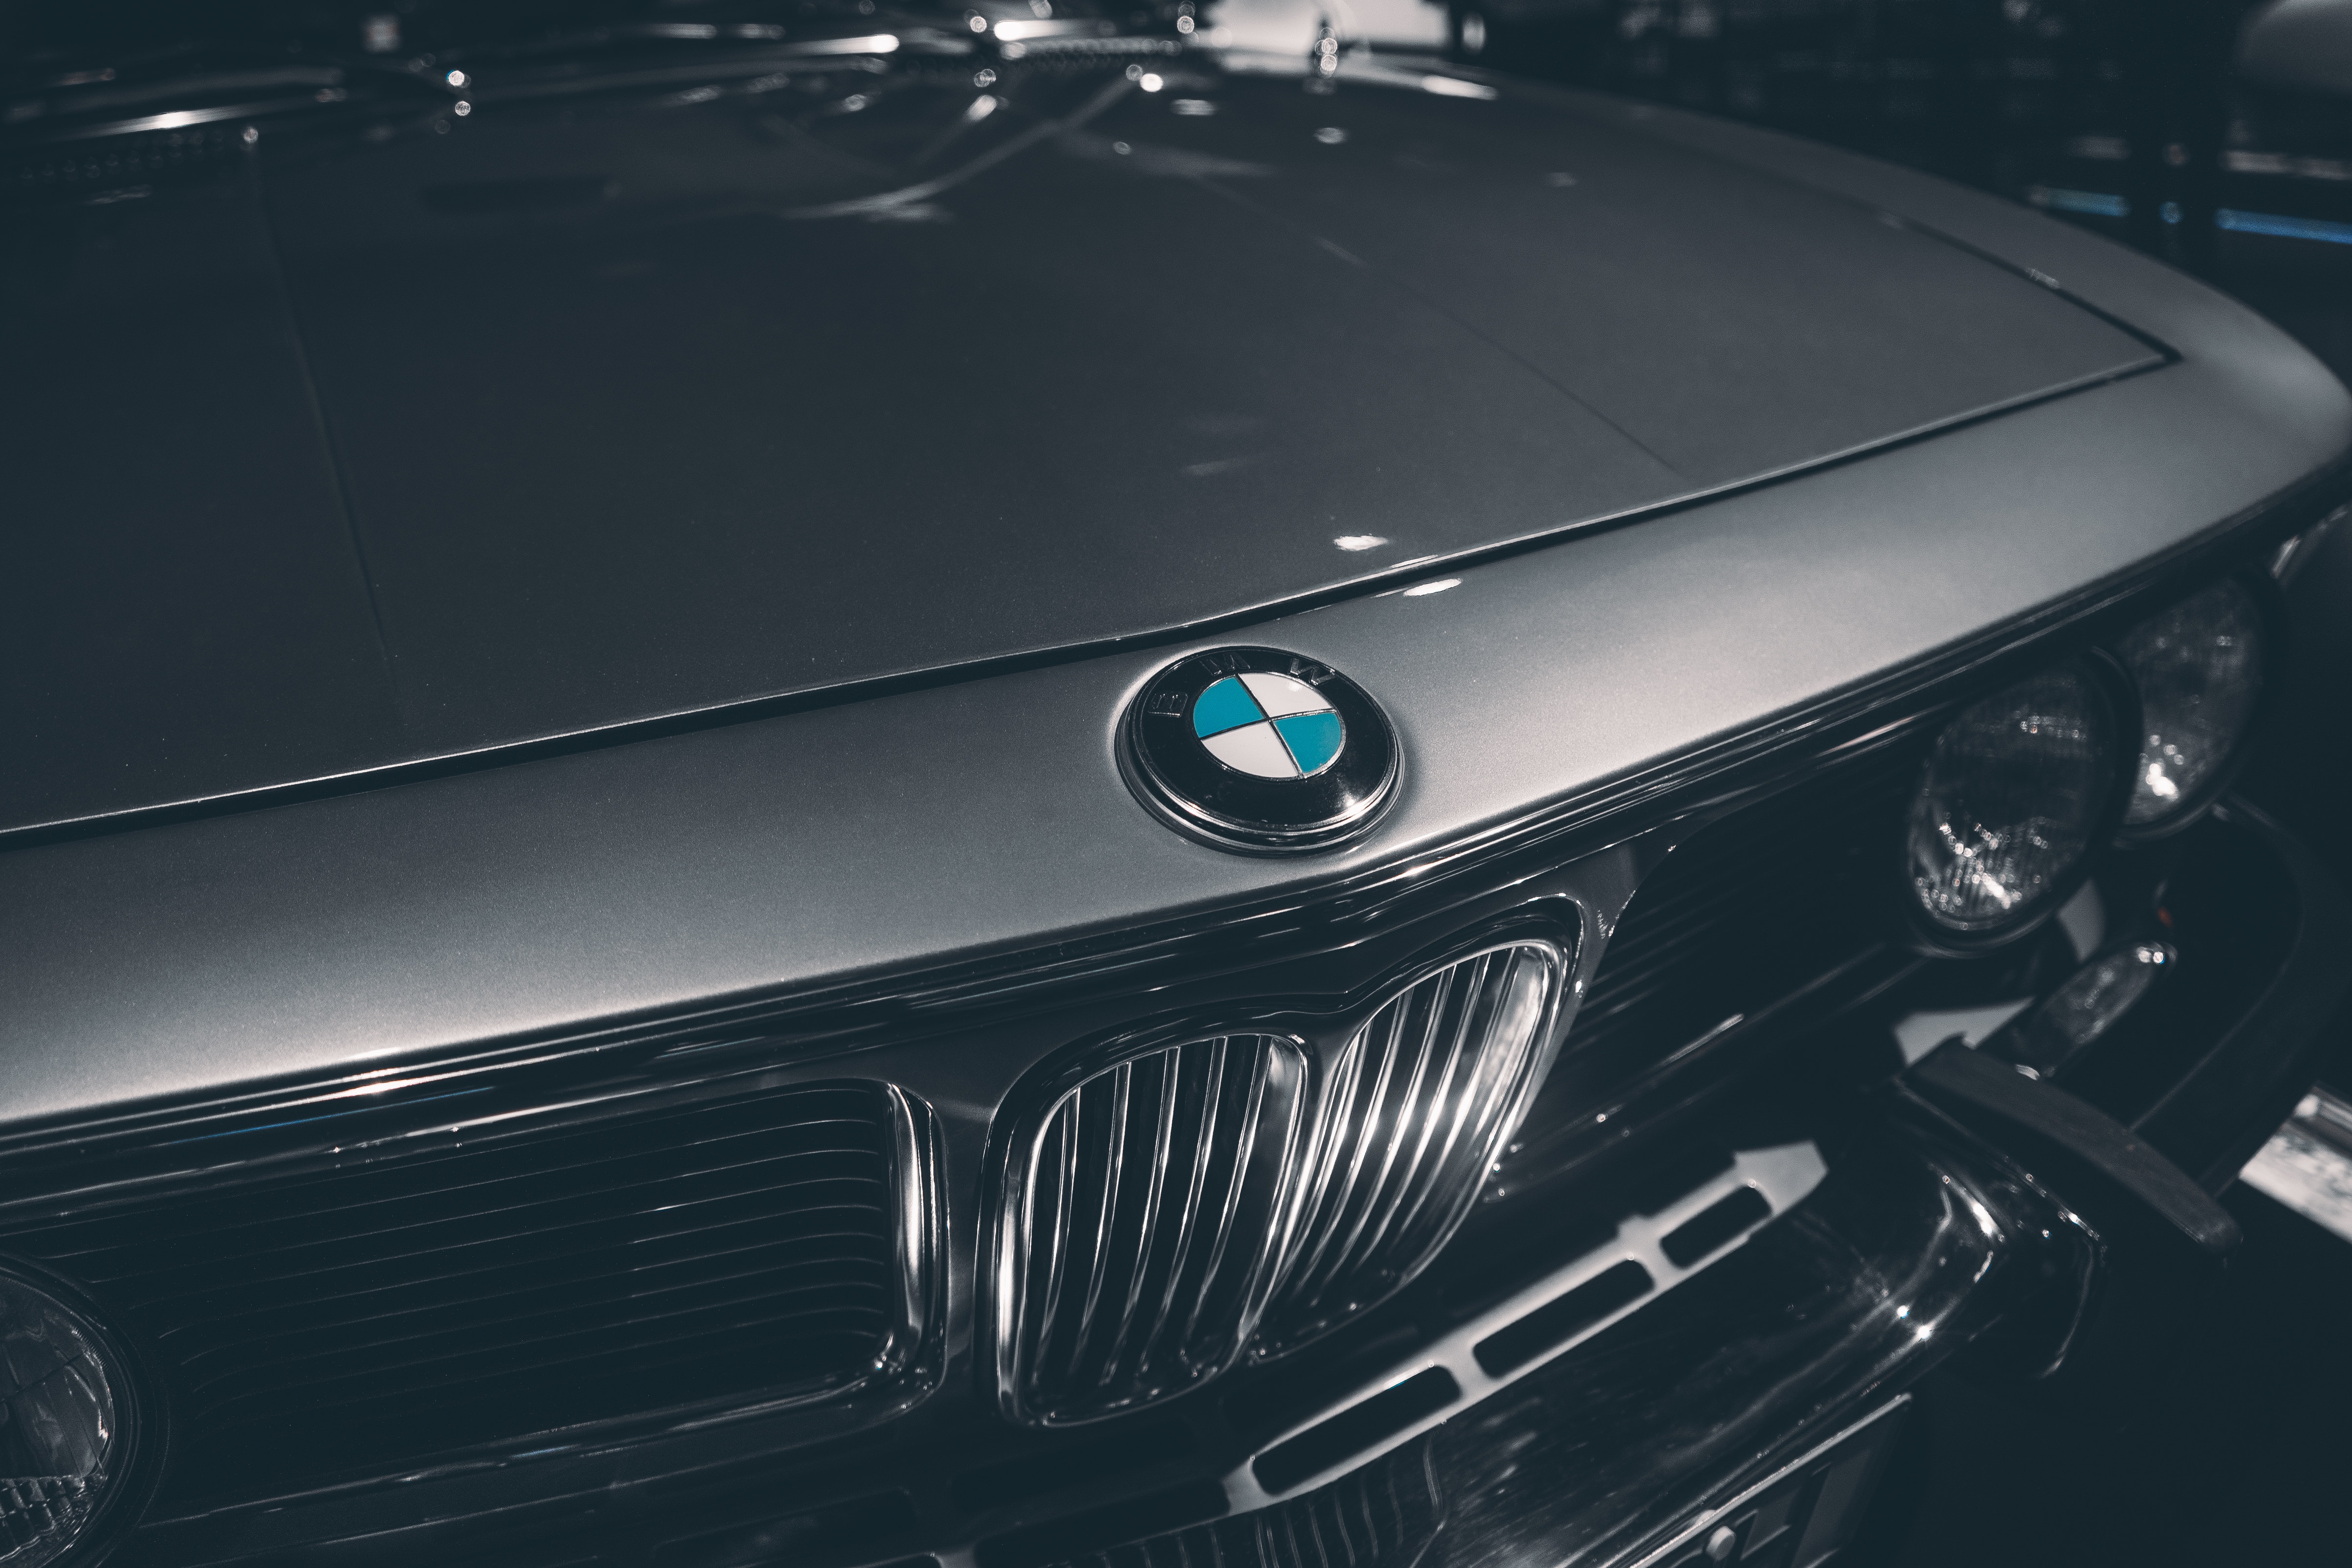 Bmw photos download the best free bmw stock photos hd images